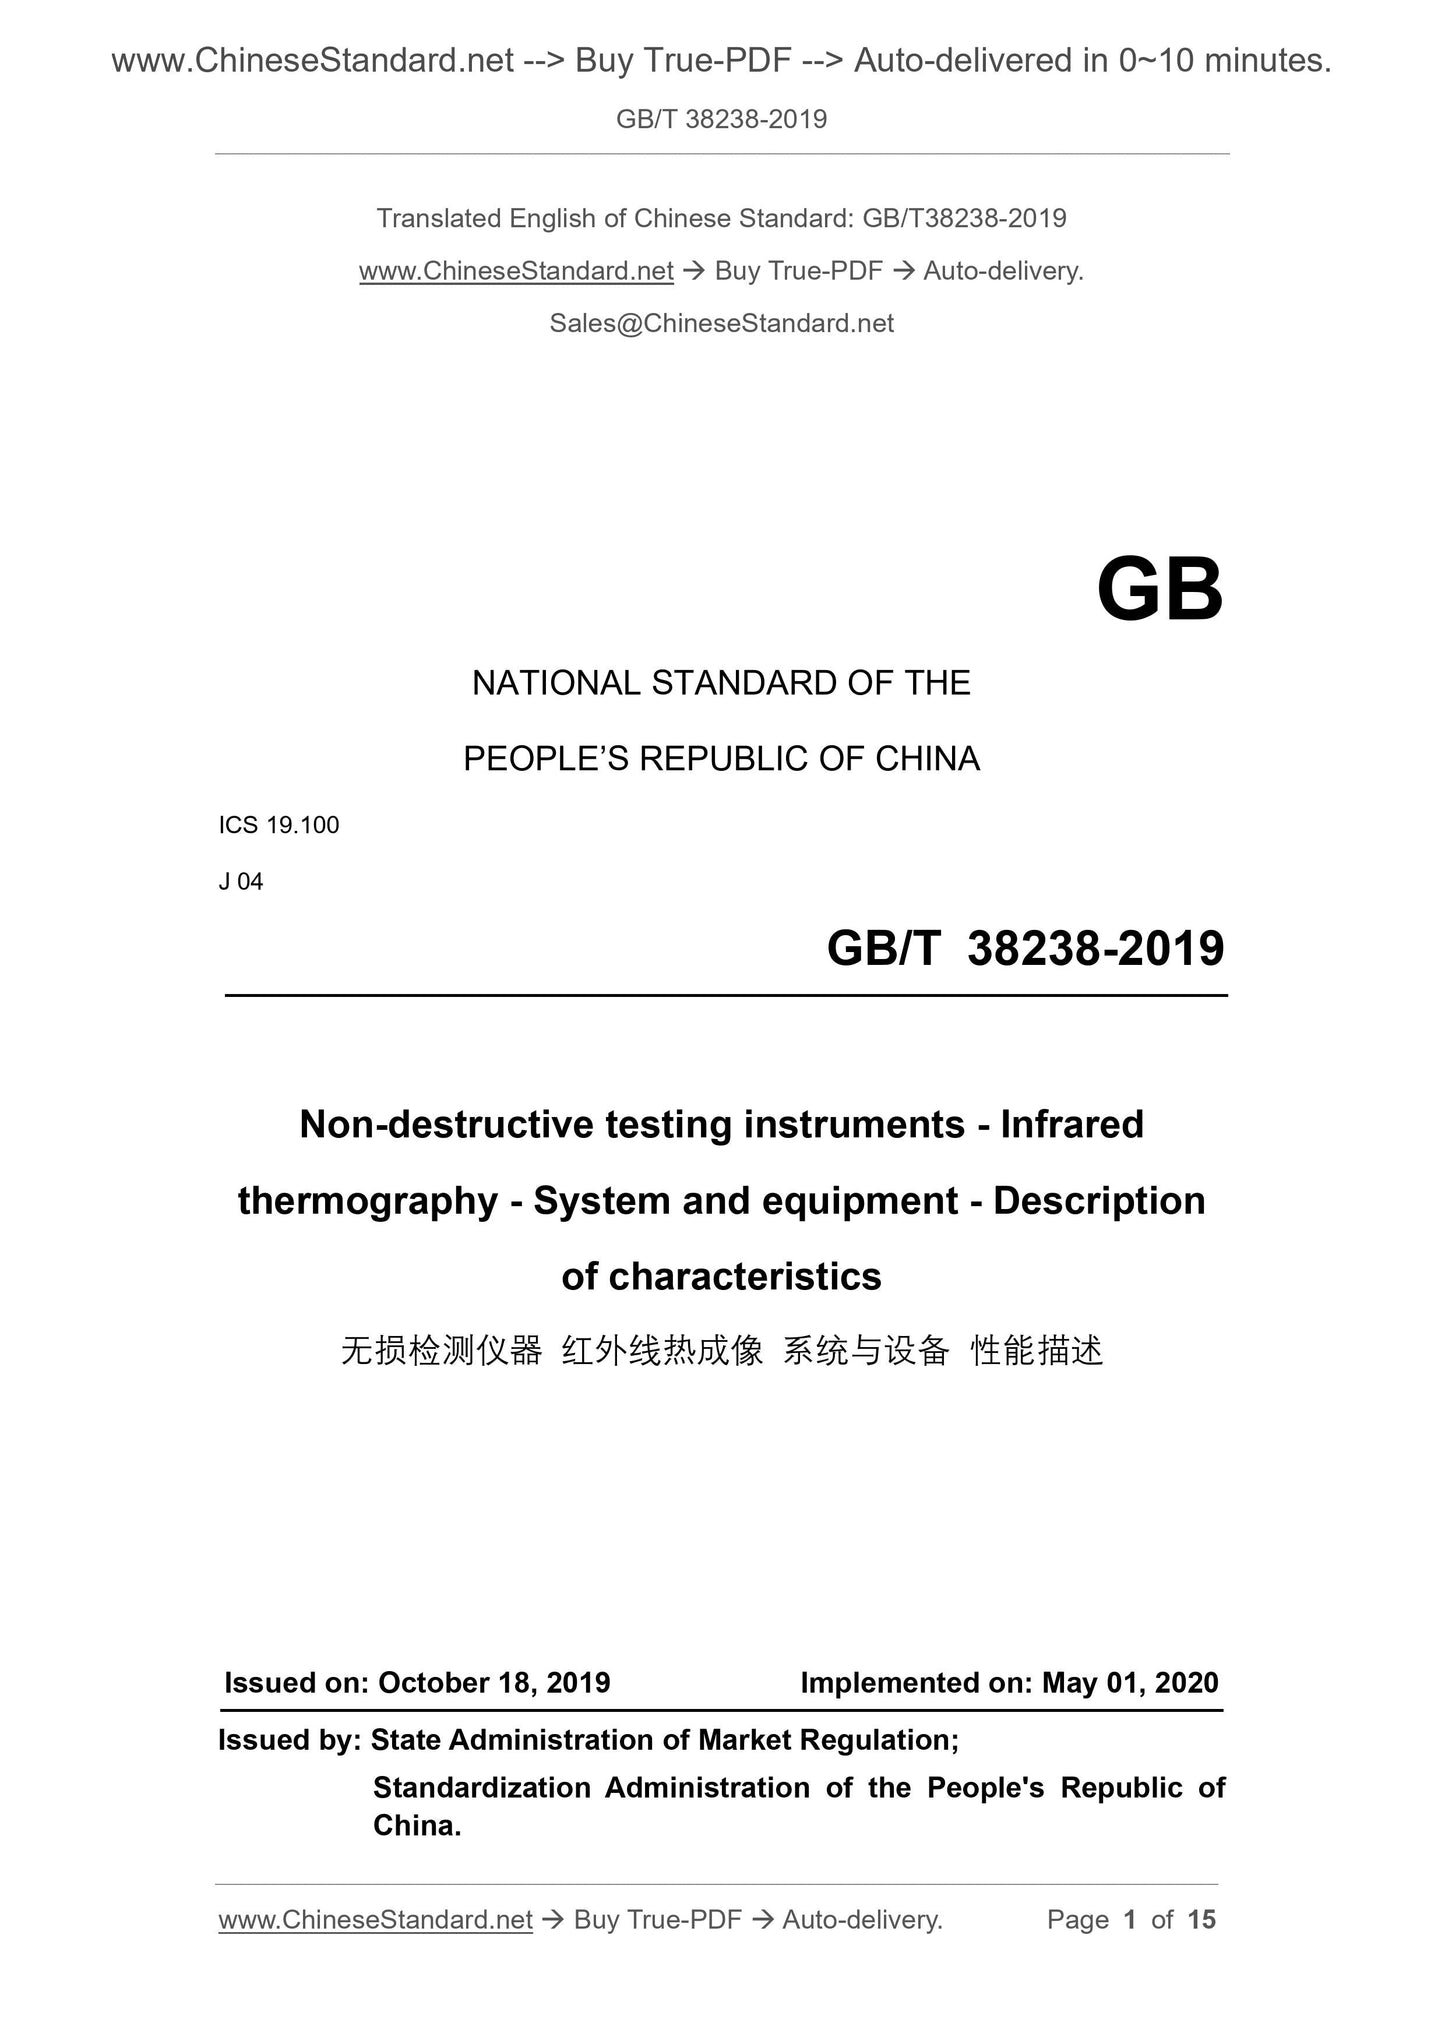 GB/T 38238-2019 Page 1